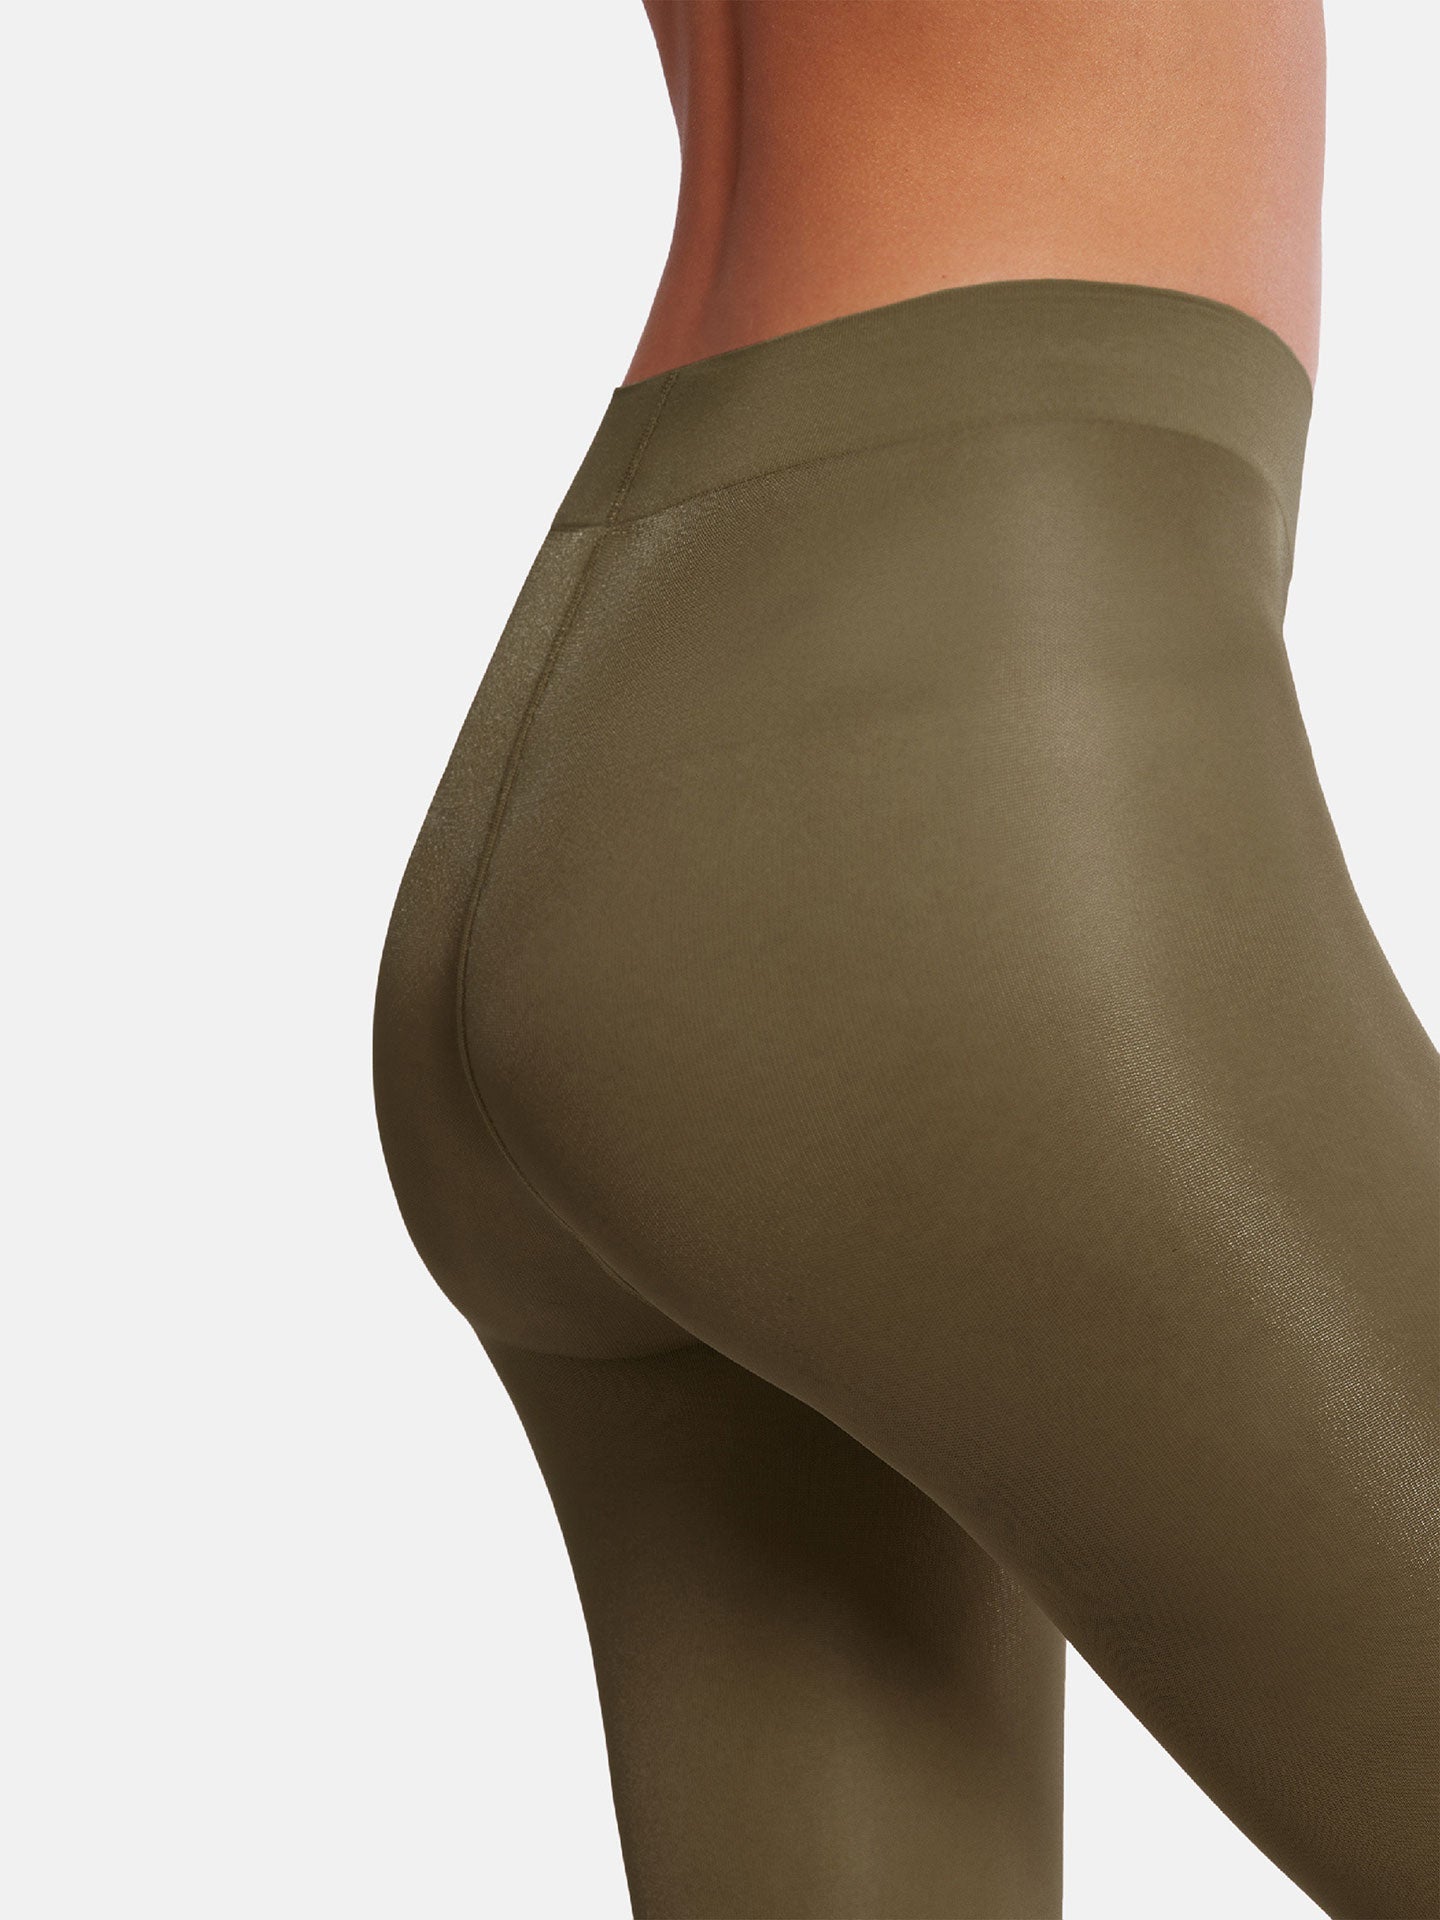 Wolford - Satin Touch 20 Comfort Dark Army